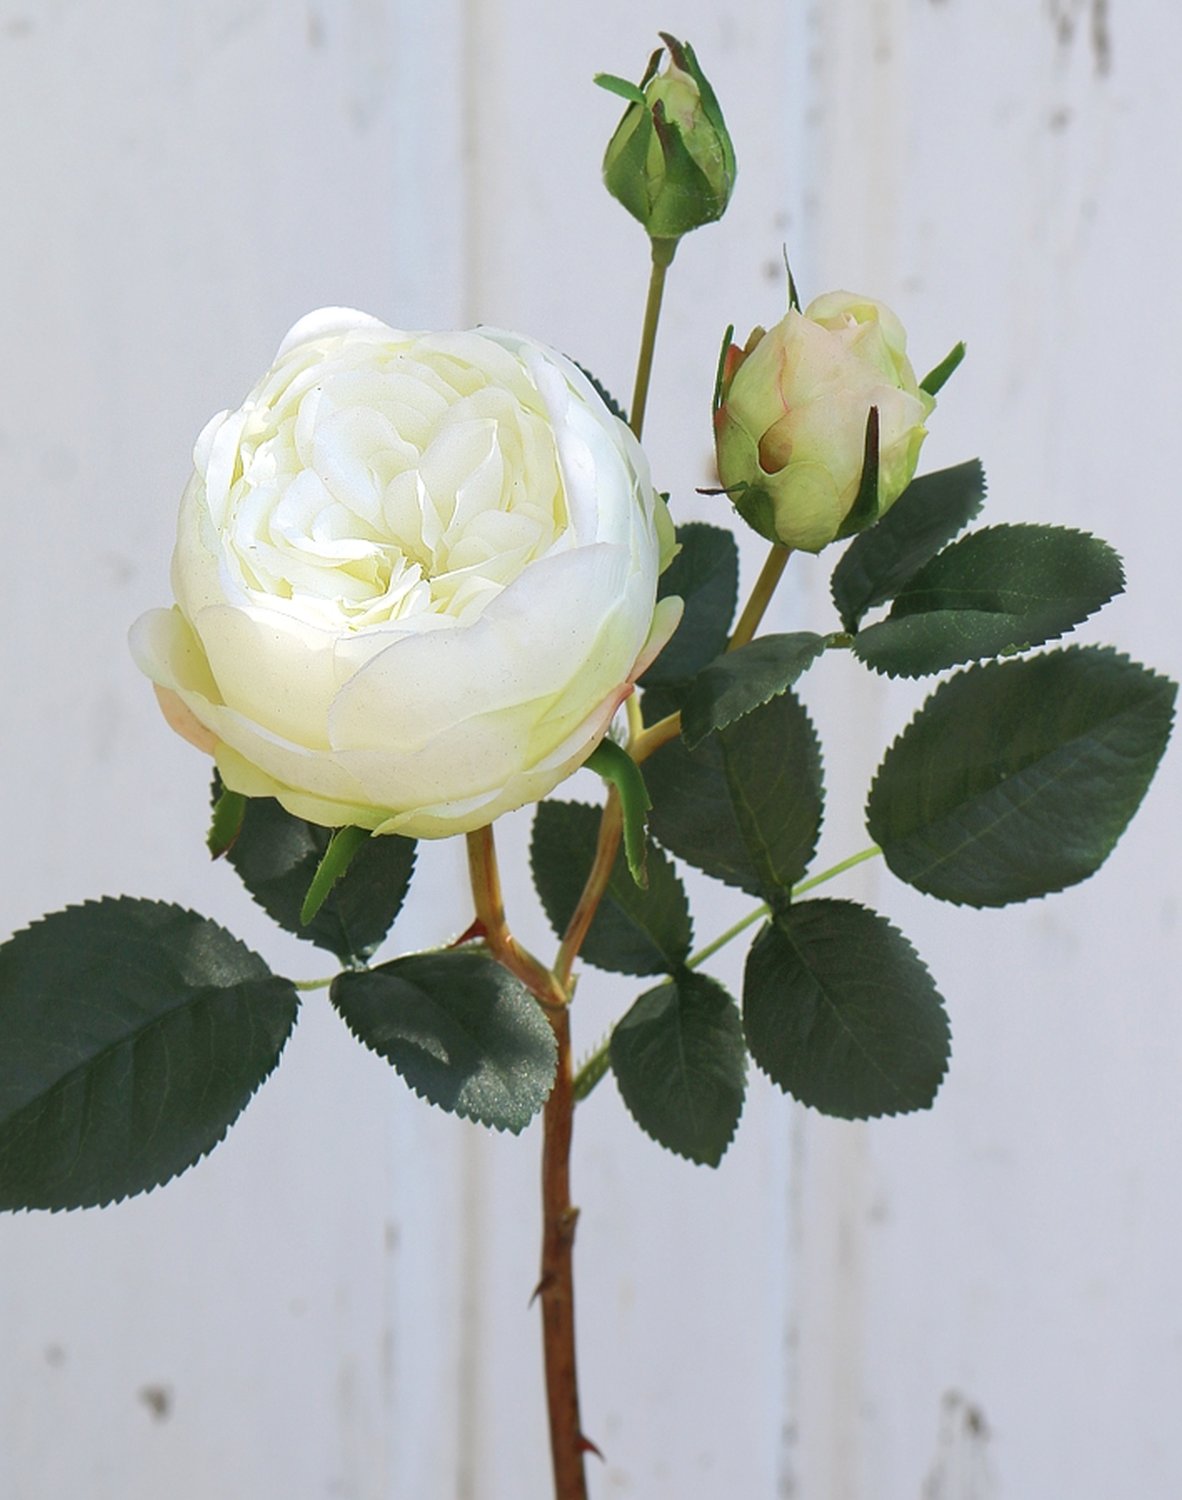 Rose artificial flower, 1 flower, 2 buds, 60 cm, real touch soft, beige-white